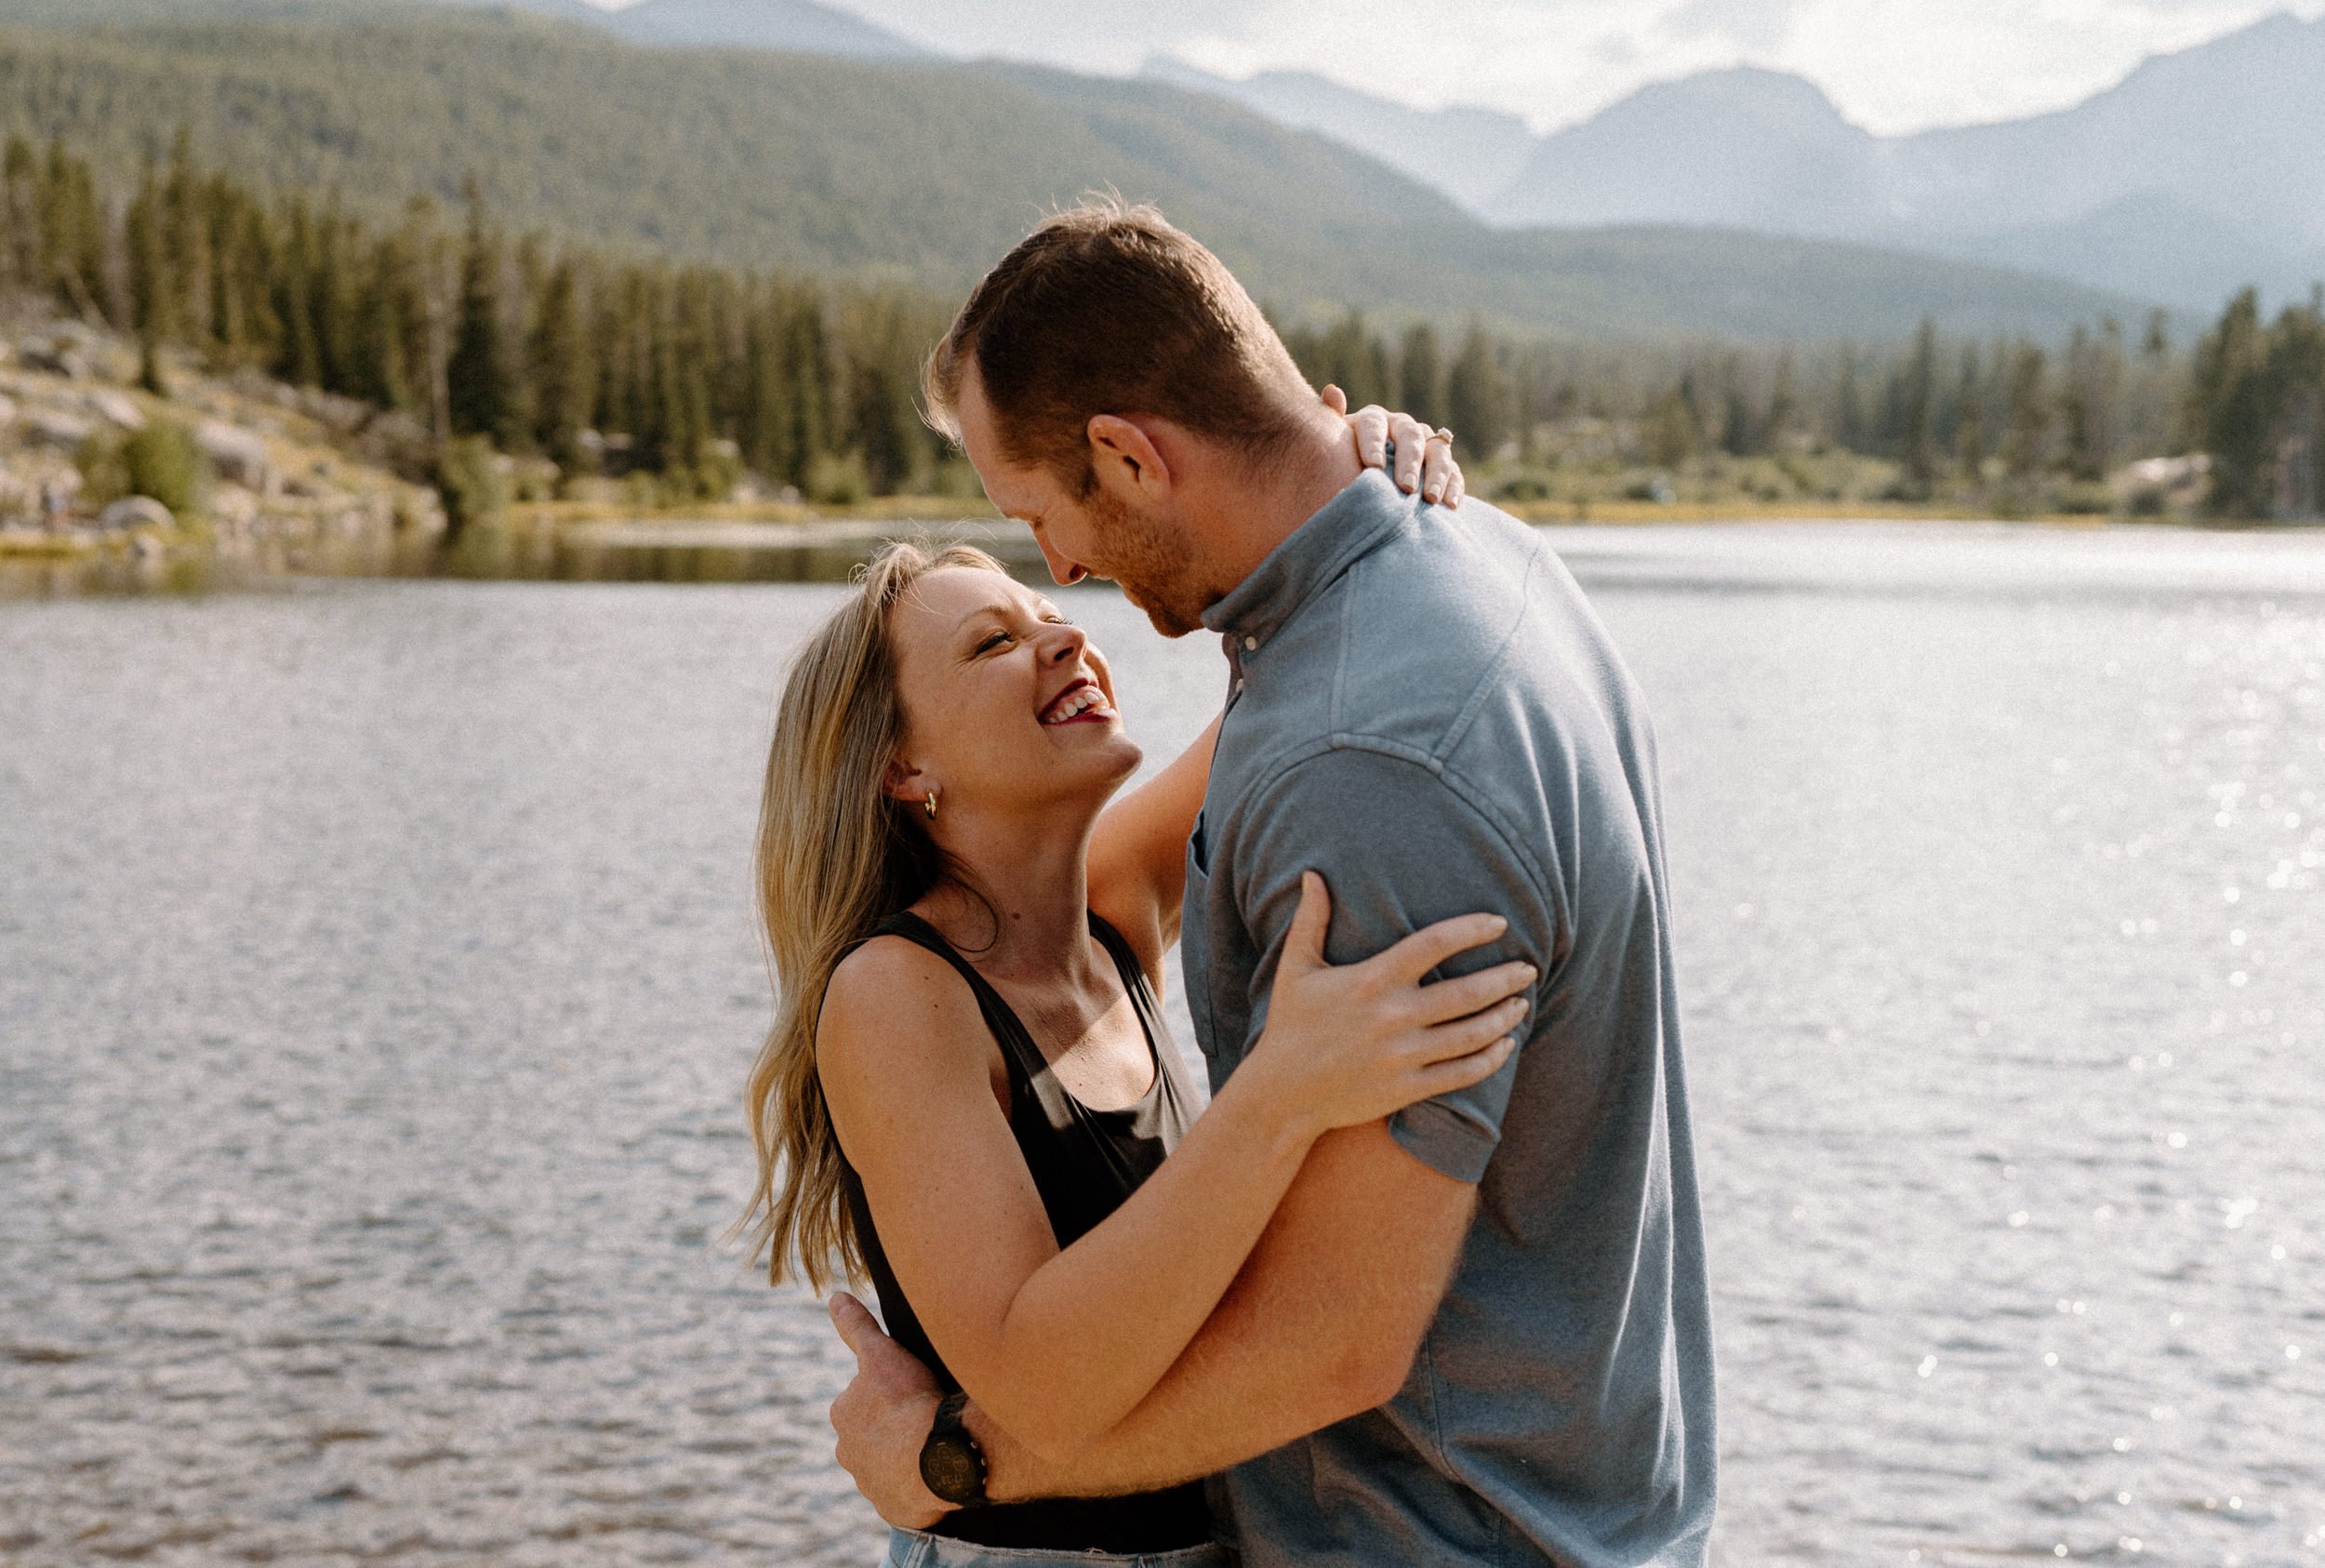 Man and woman laugh at each other during engagement session